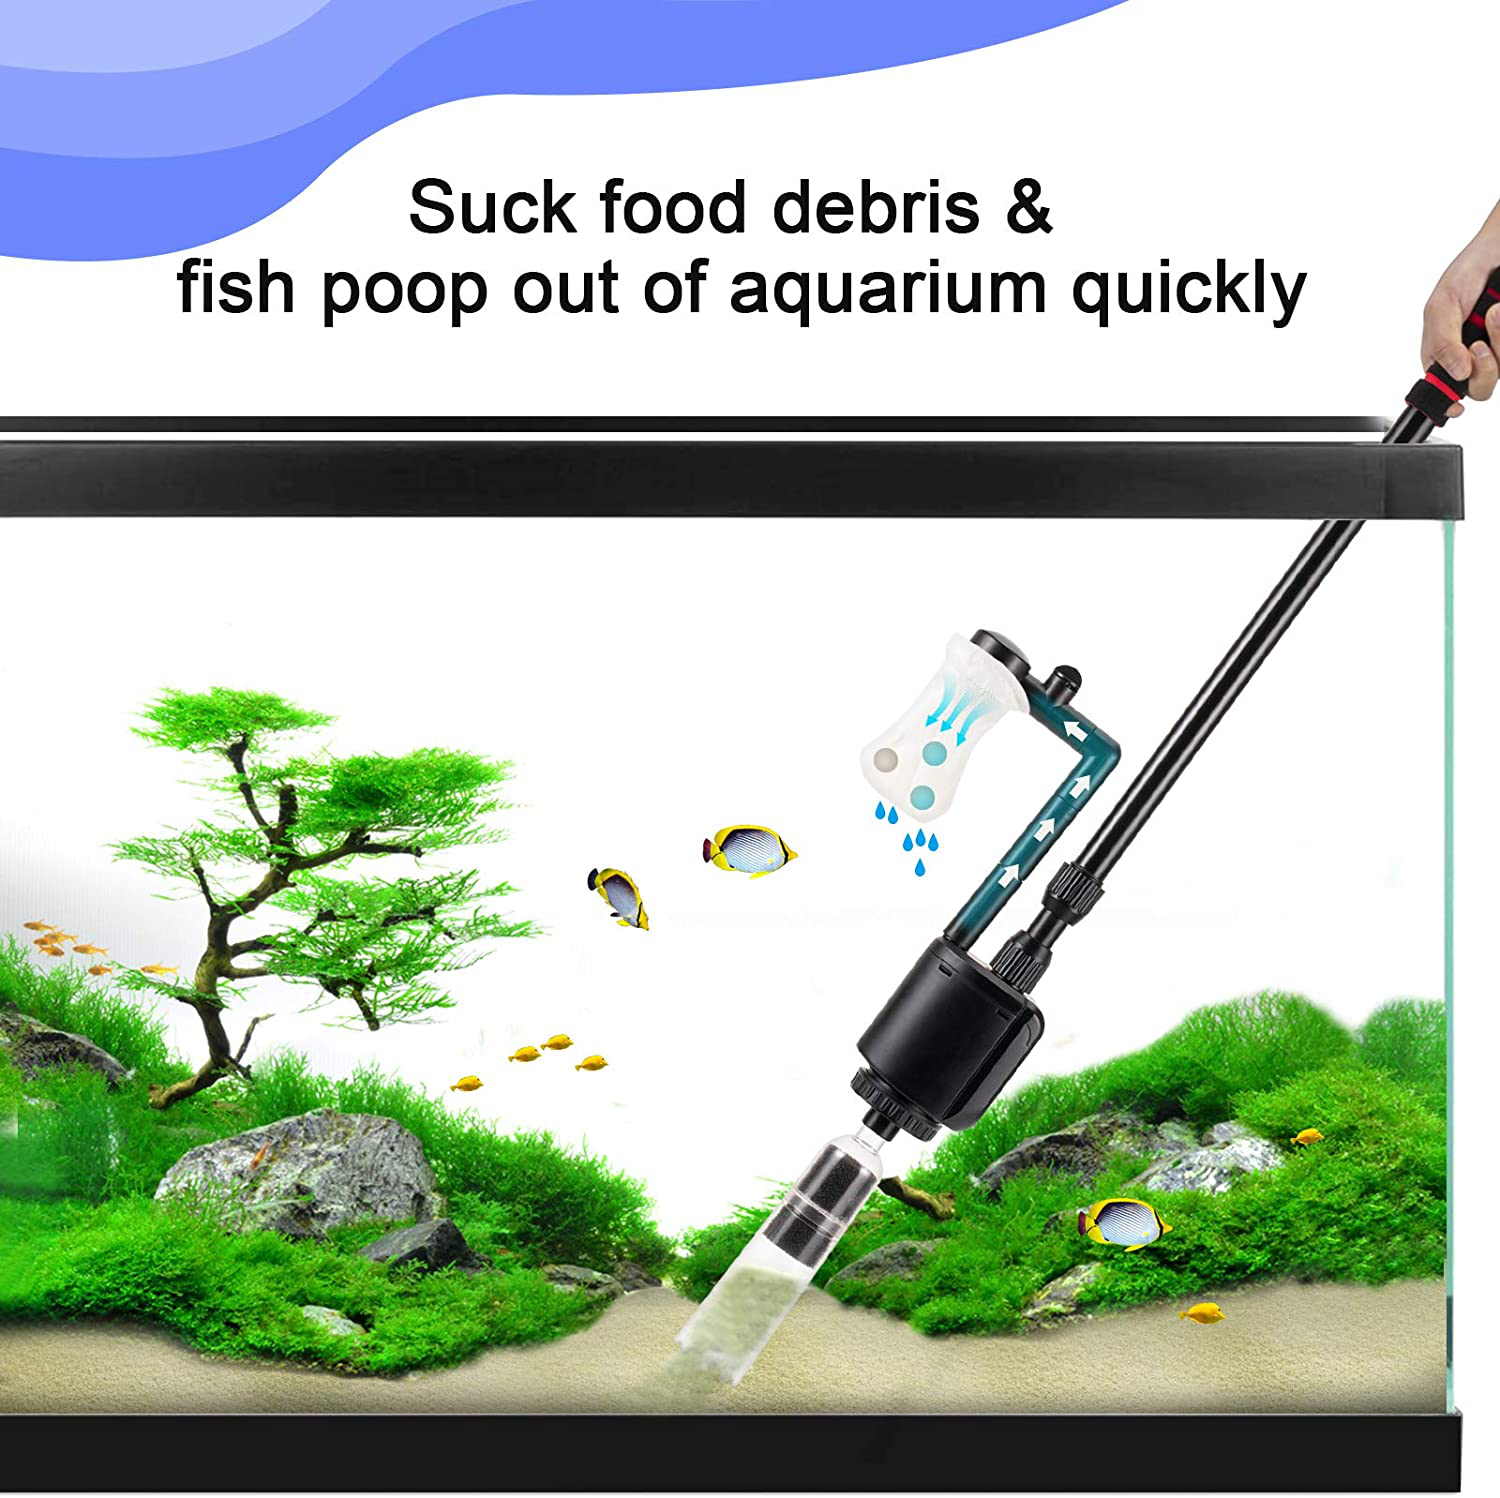 AQQA Aquarium Gravel Cleaner Siphon Kit,6 in 1 Electric Automatic Removable Vacuum Water Changer，Multifunction Wash Sand Suck the Stool Filter 110V/20W 320GPH